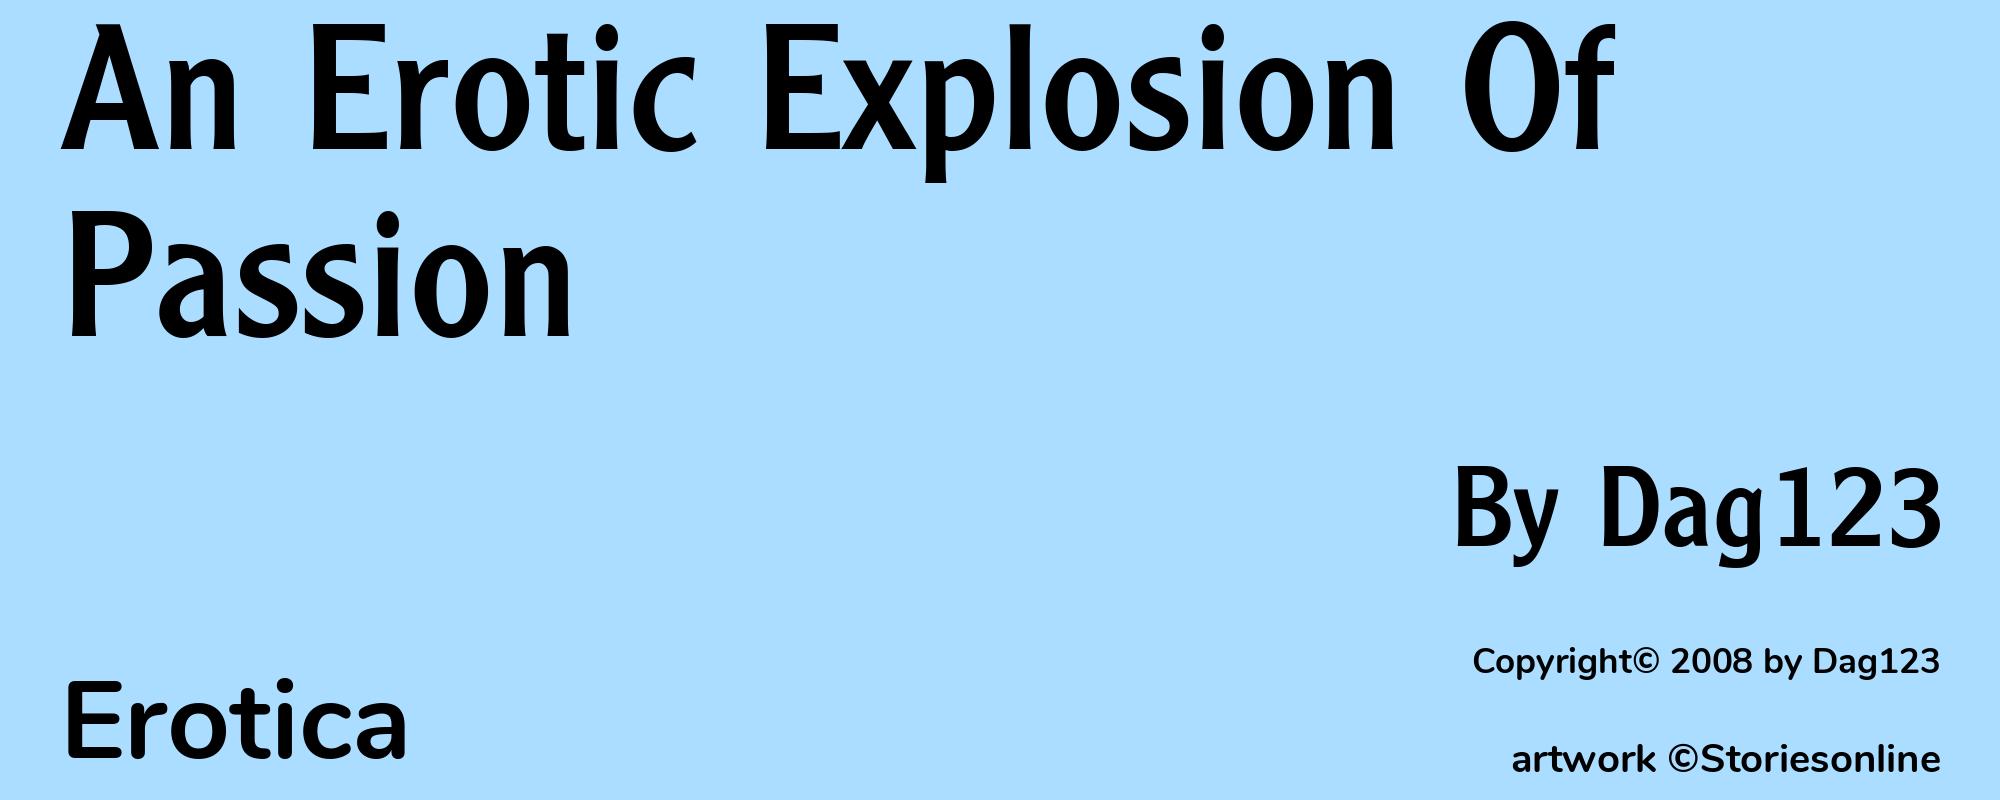 An Erotic Explosion Of Passion - Cover